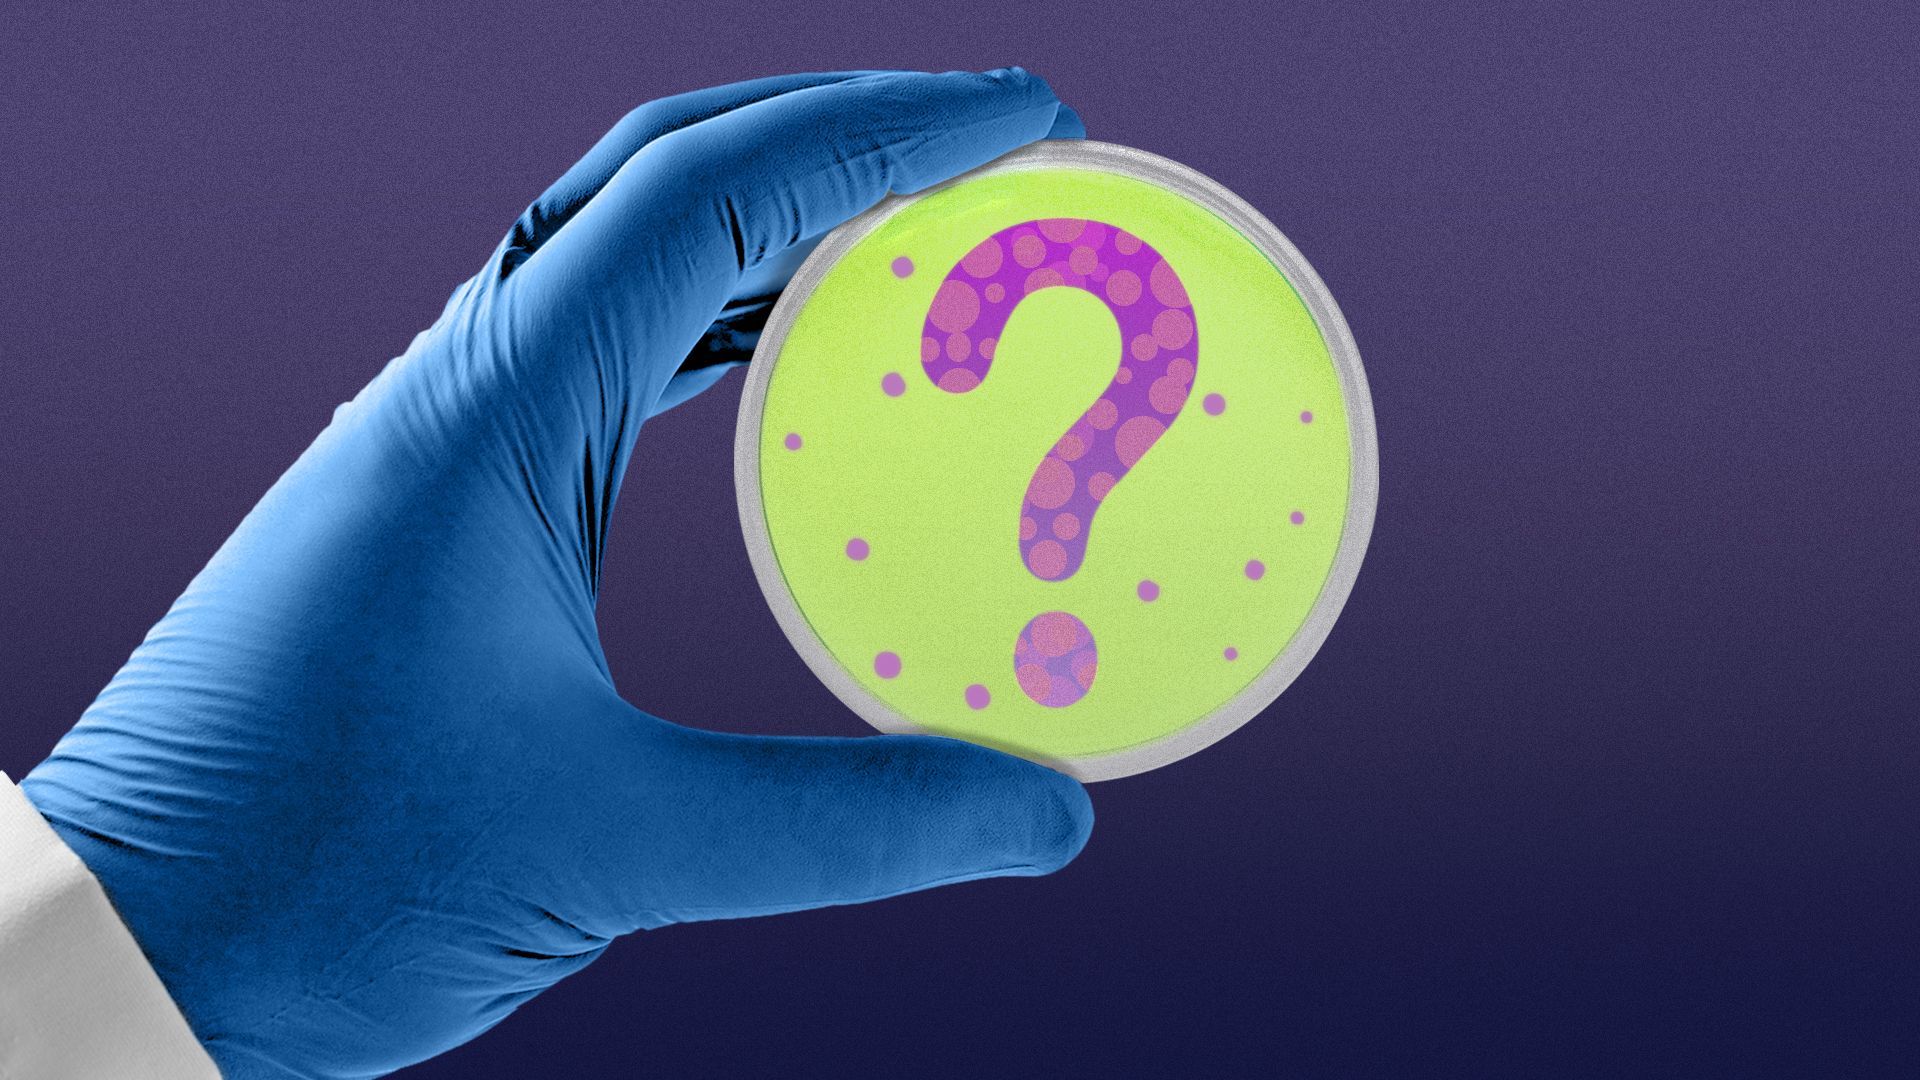 Illustration of a gloved hand holding a petri dish with a question mark.